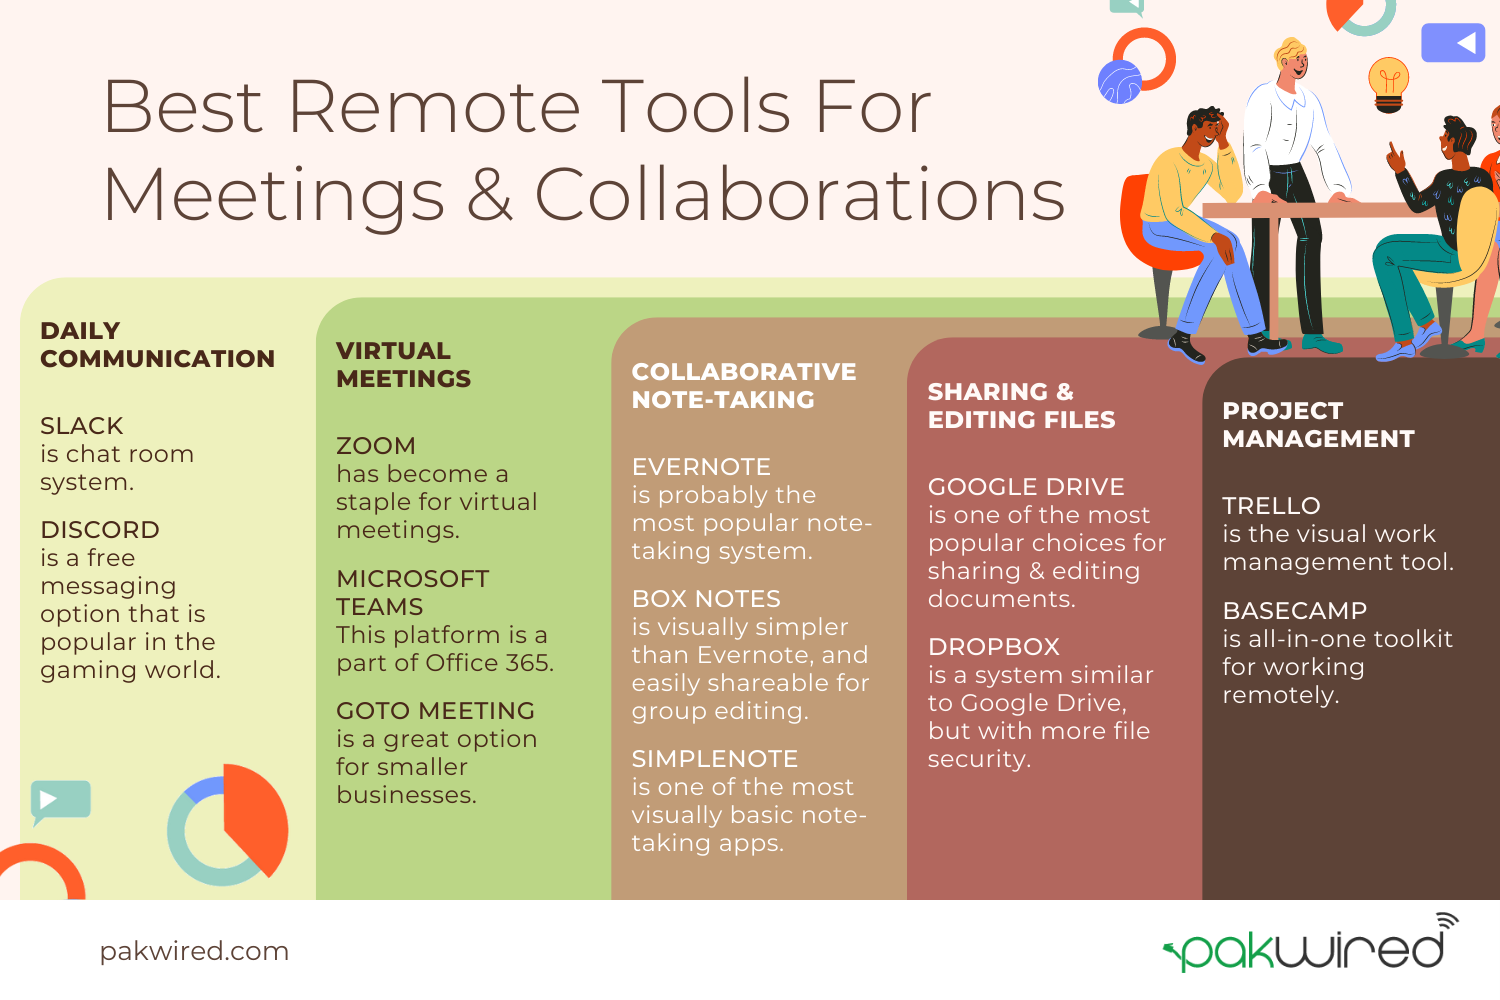 Best Remote Tools For Meetings and Collaborations